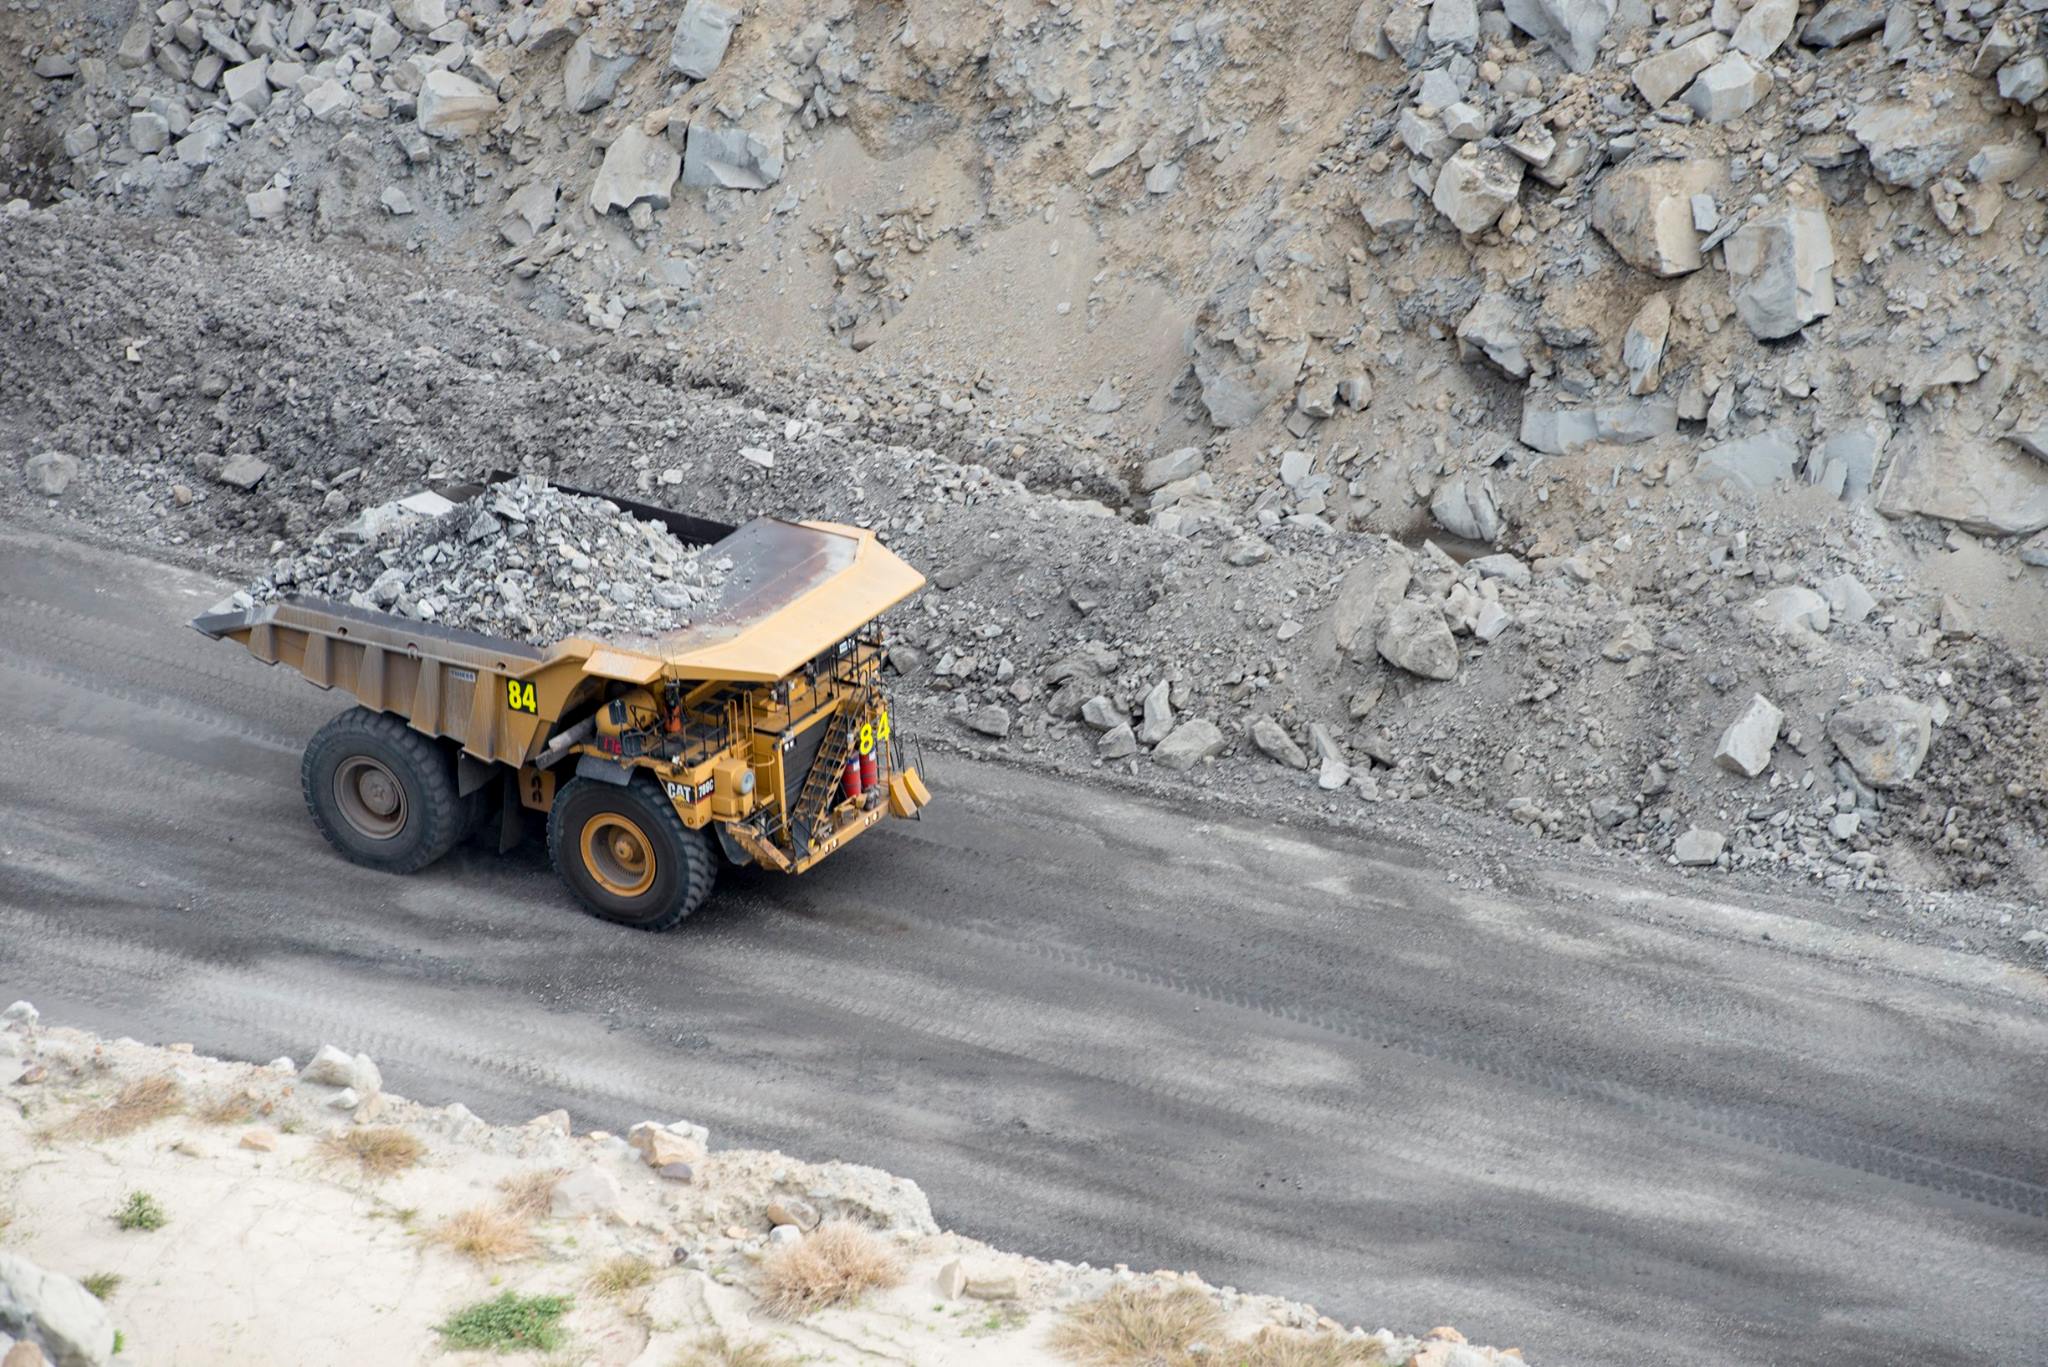 Global Road Technology keeps mine dust suppression supply chain open